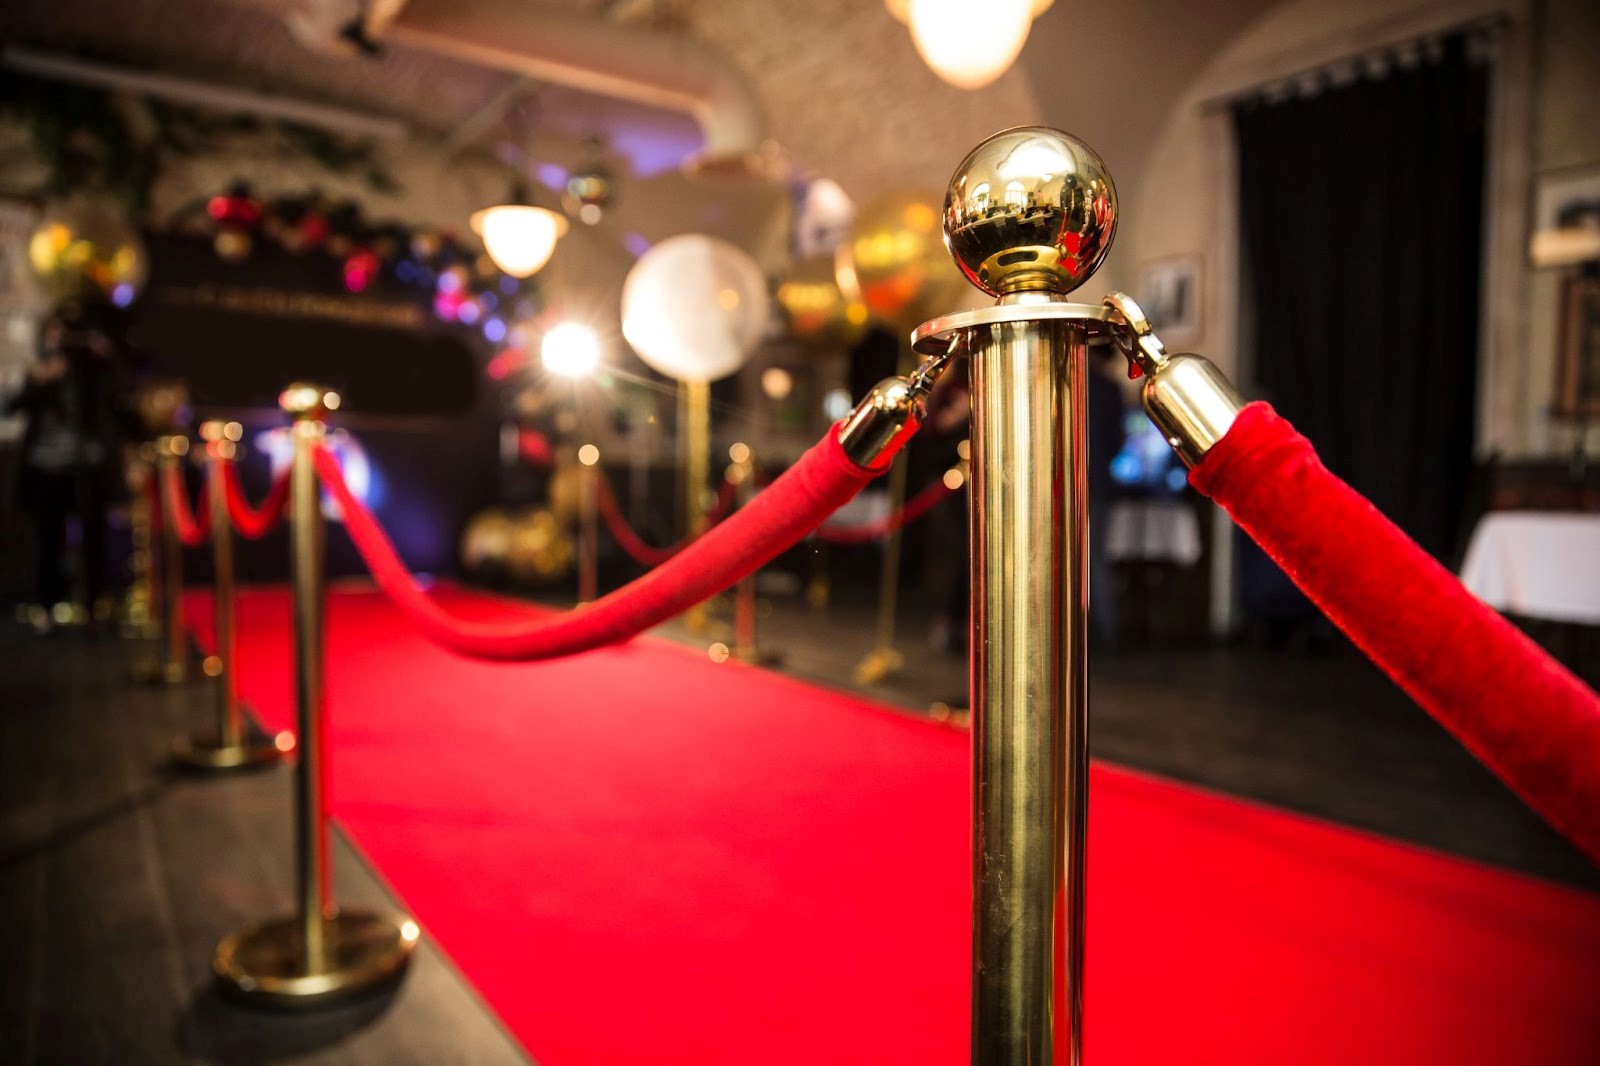 Red carpet between rope barrier in decorated great room